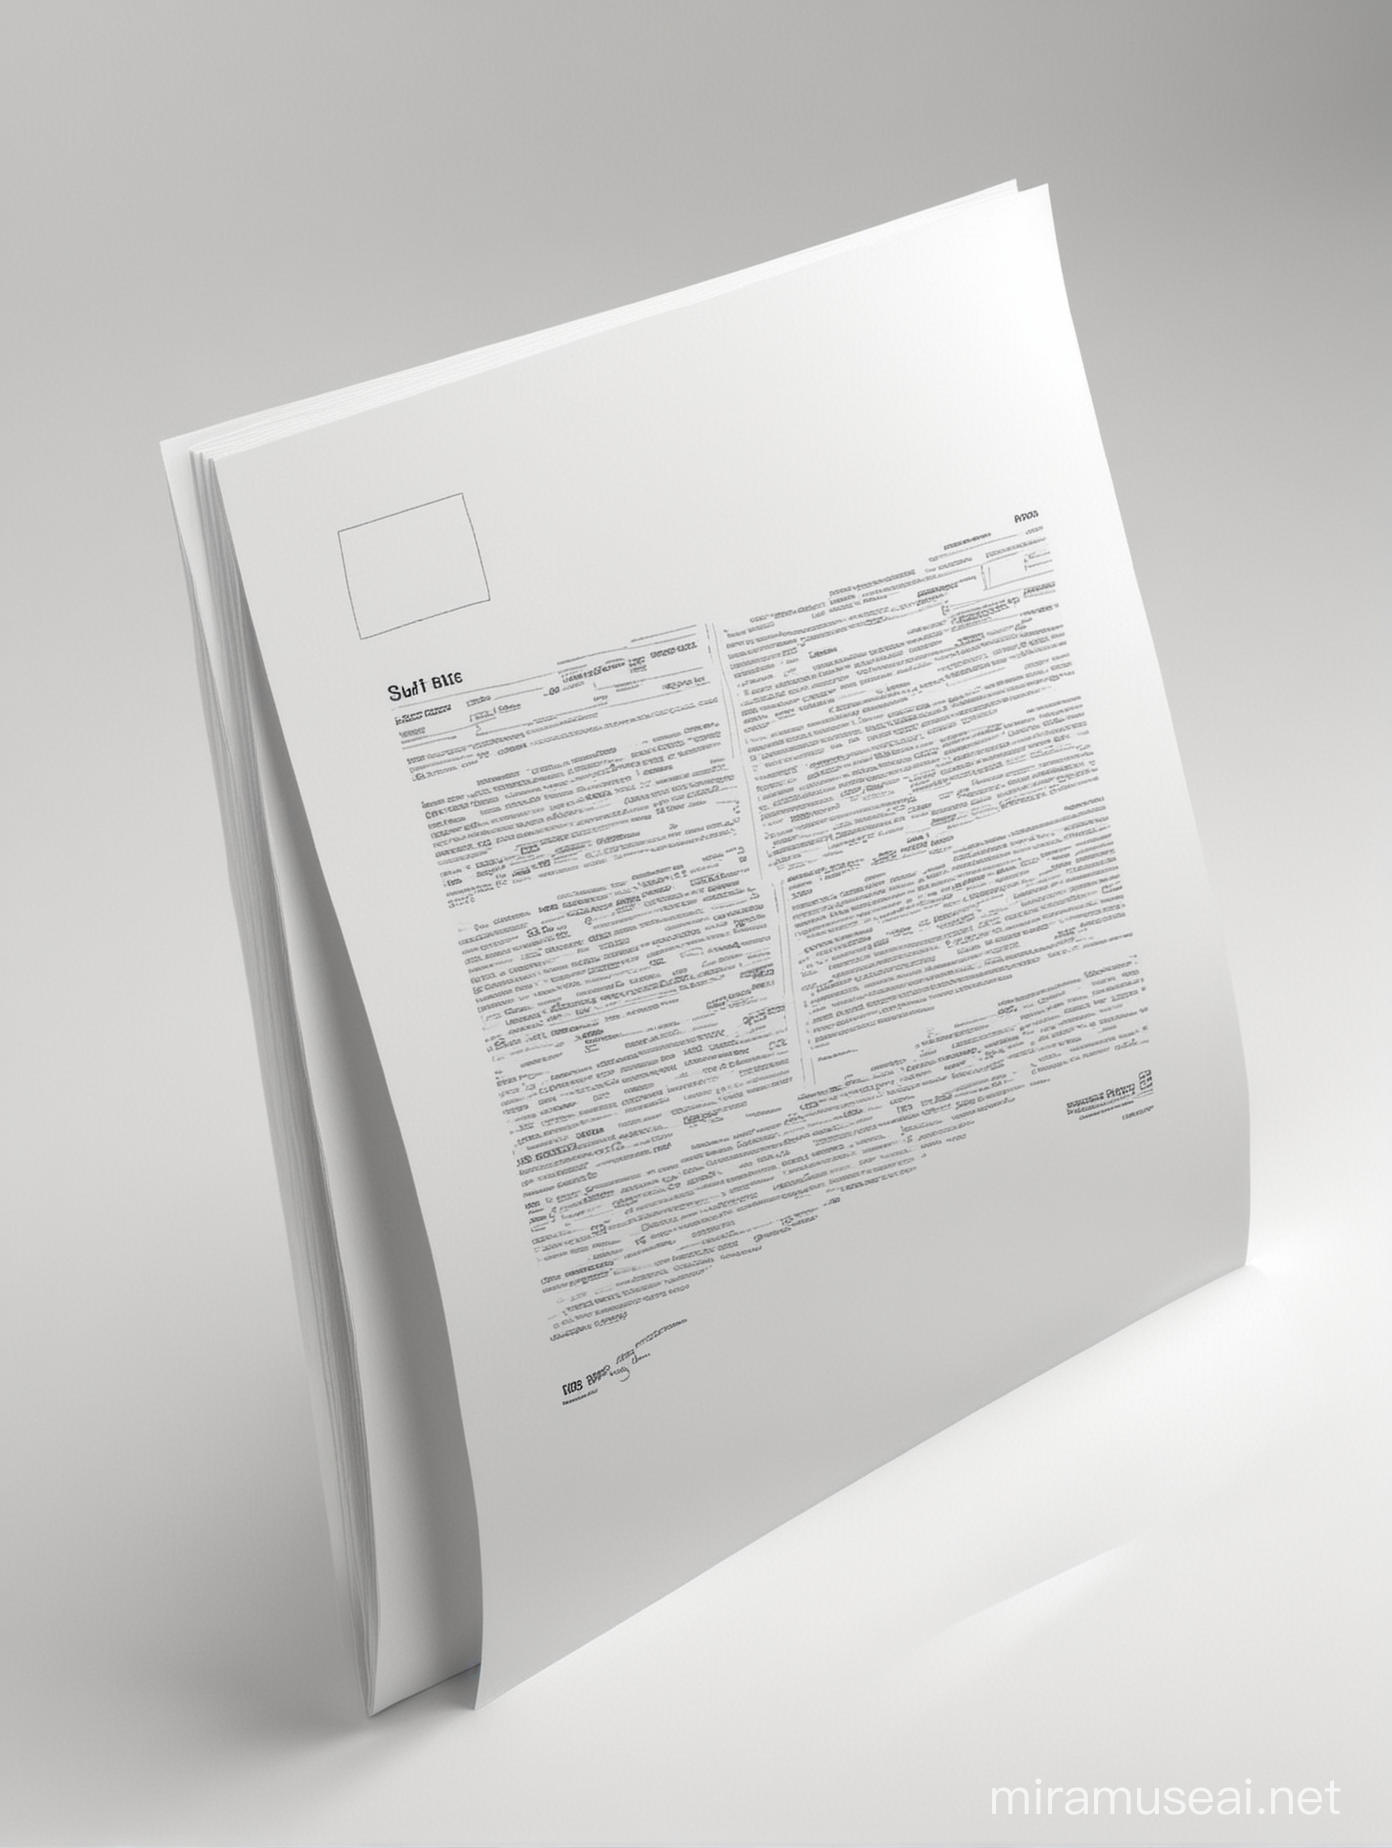 Realistic 3D White A4 Document with Shadow on White Background